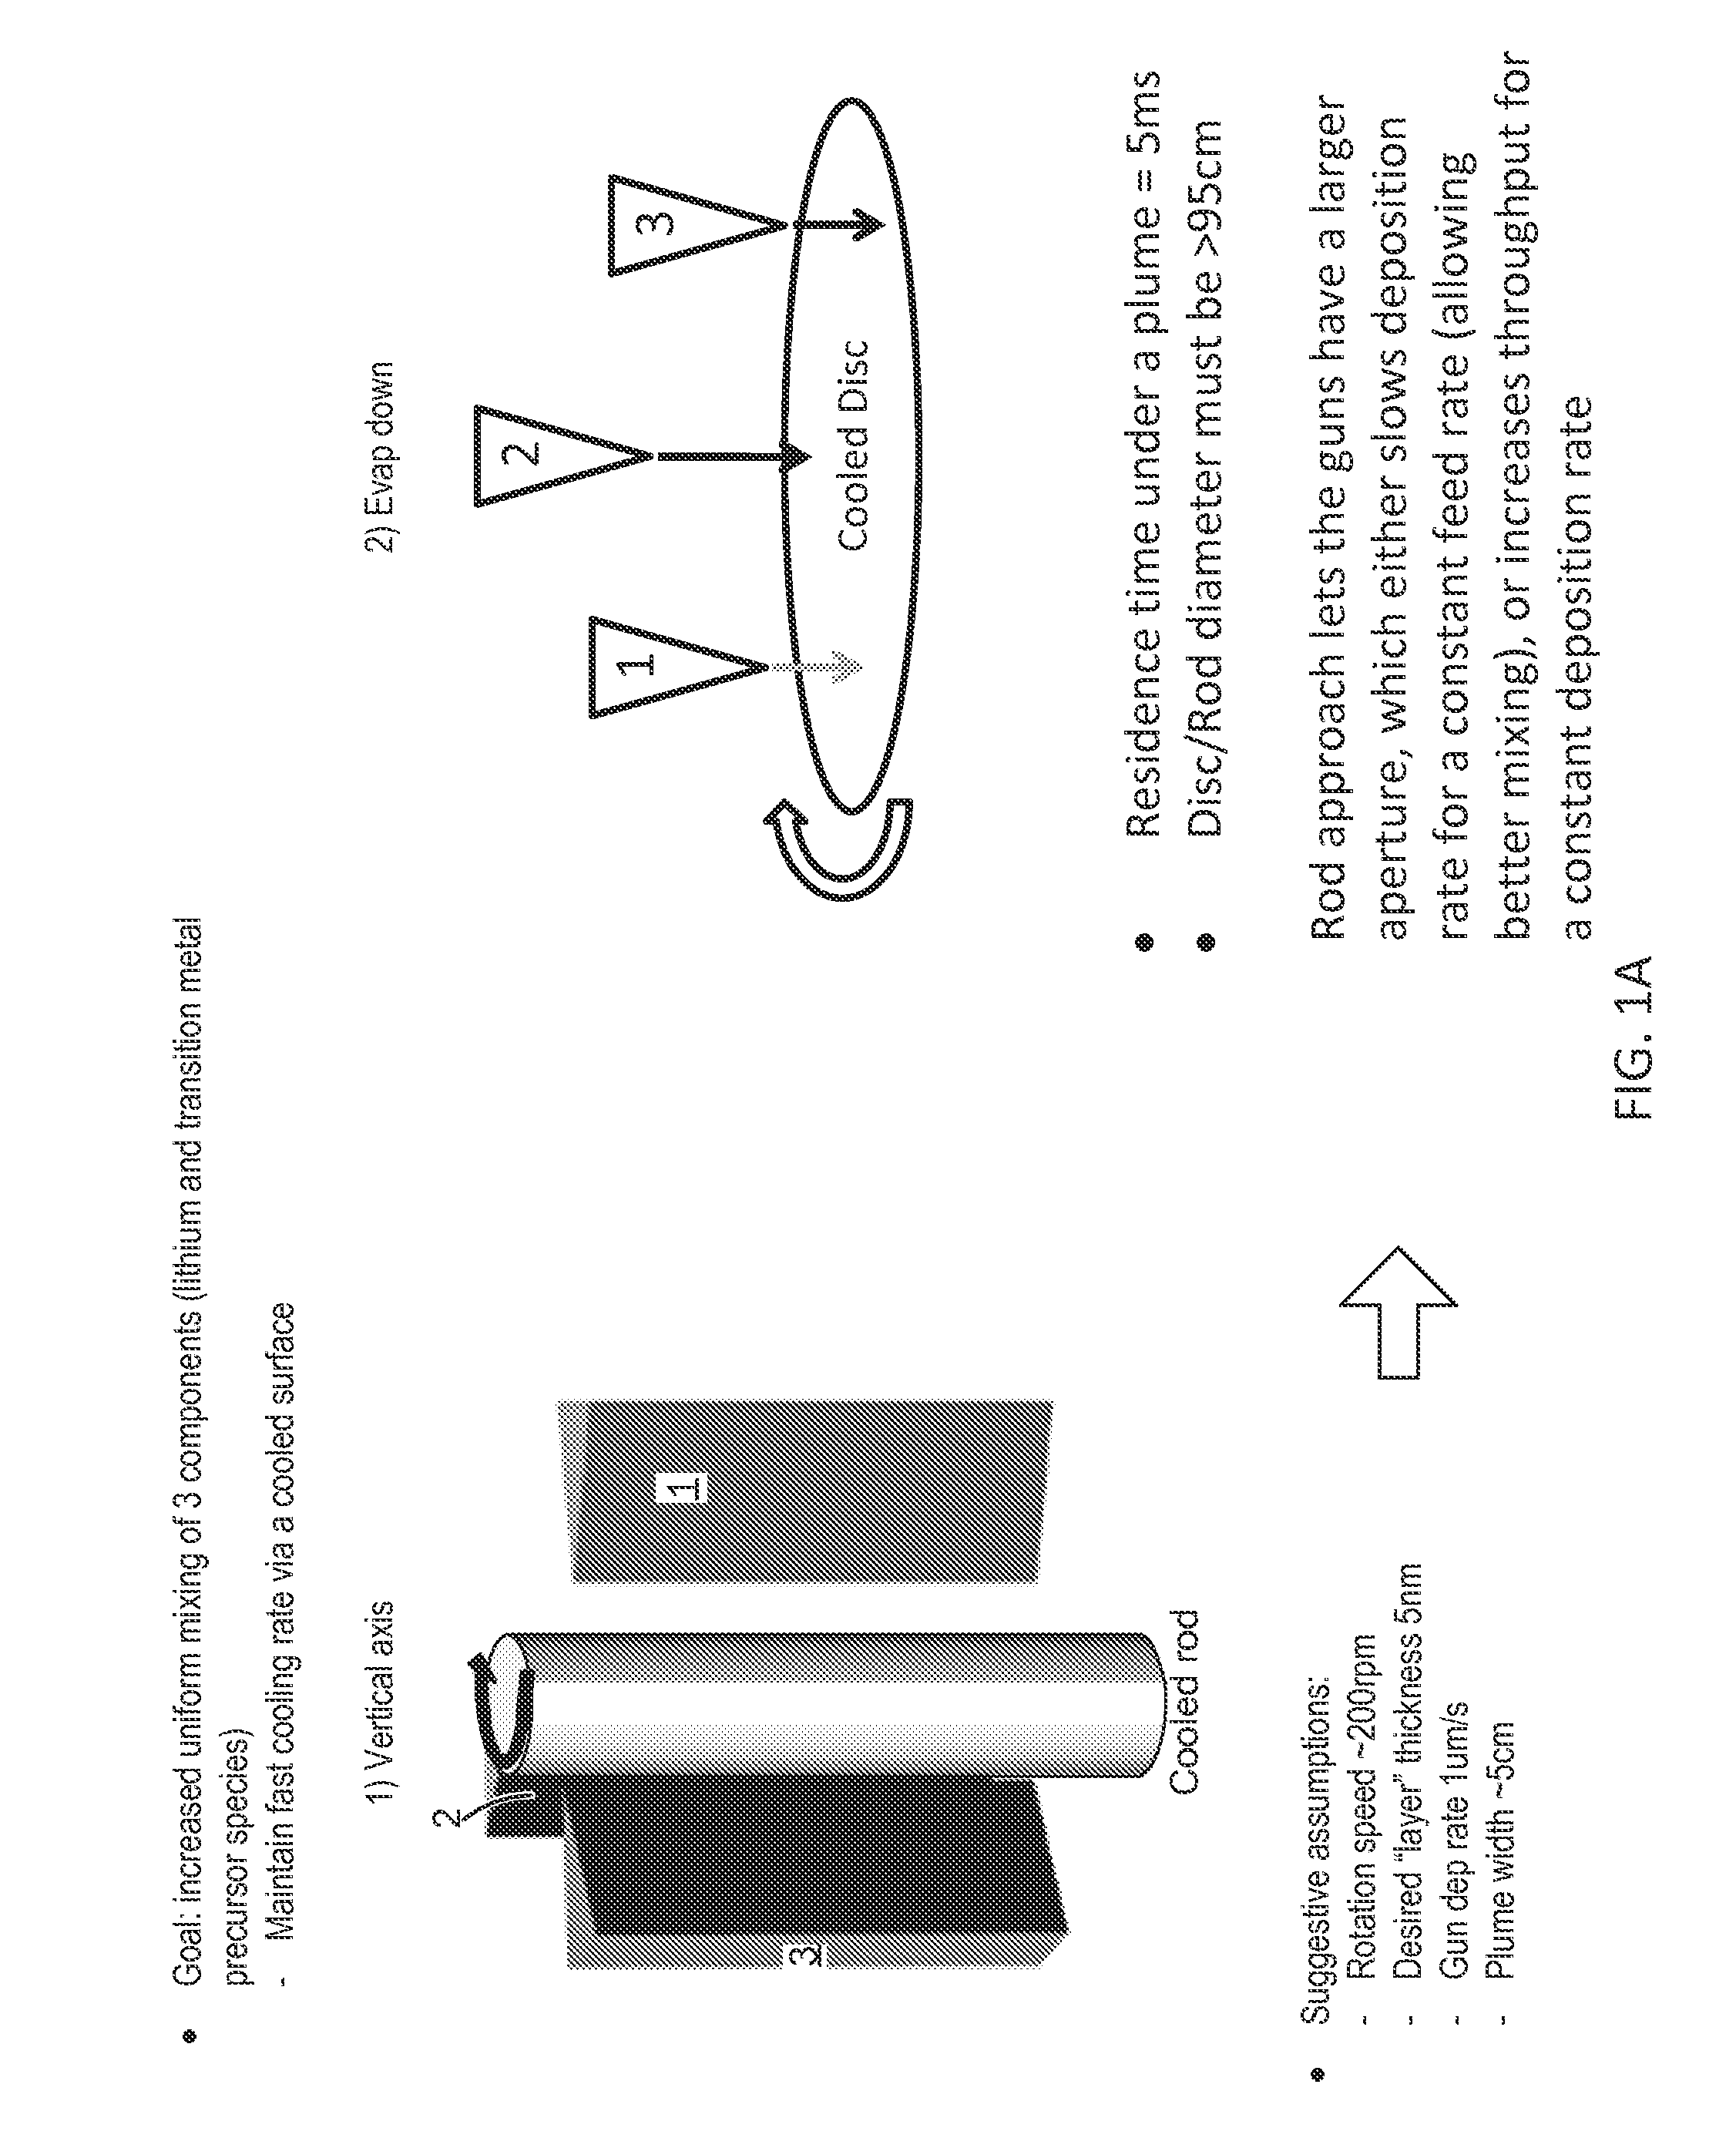 Flash evaporation of solid state battery component